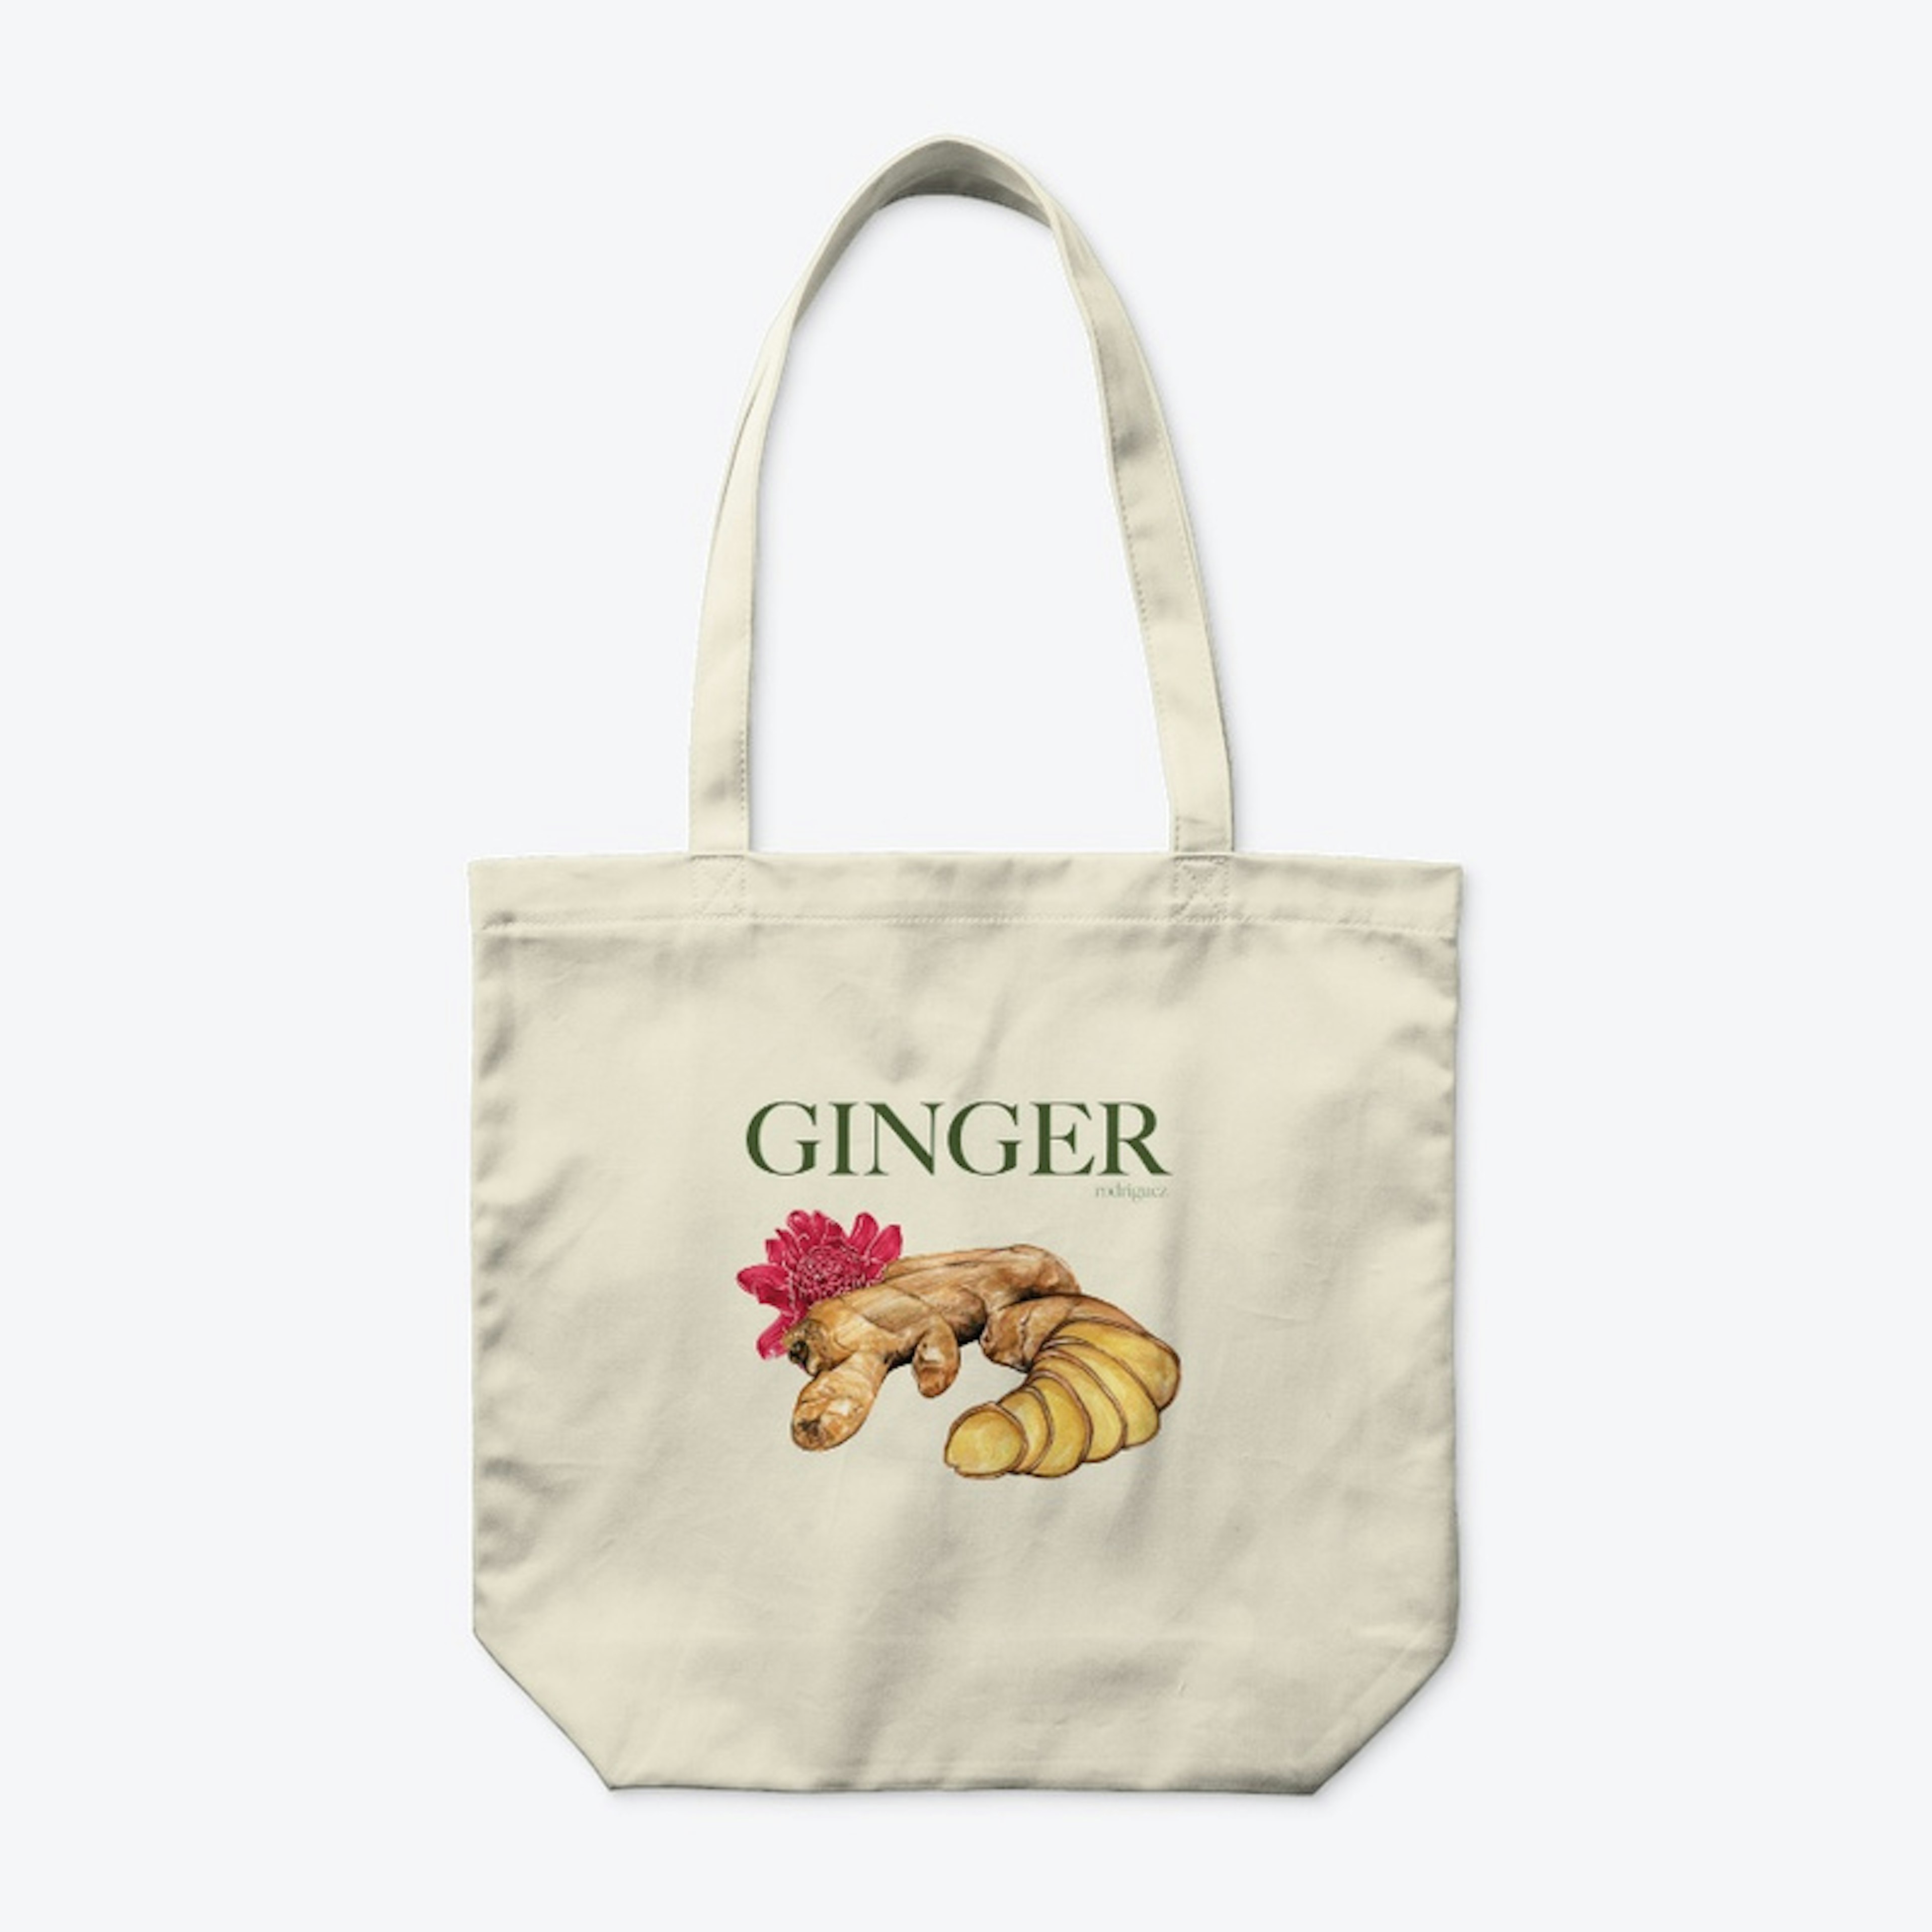 ginger flower and root tote bag